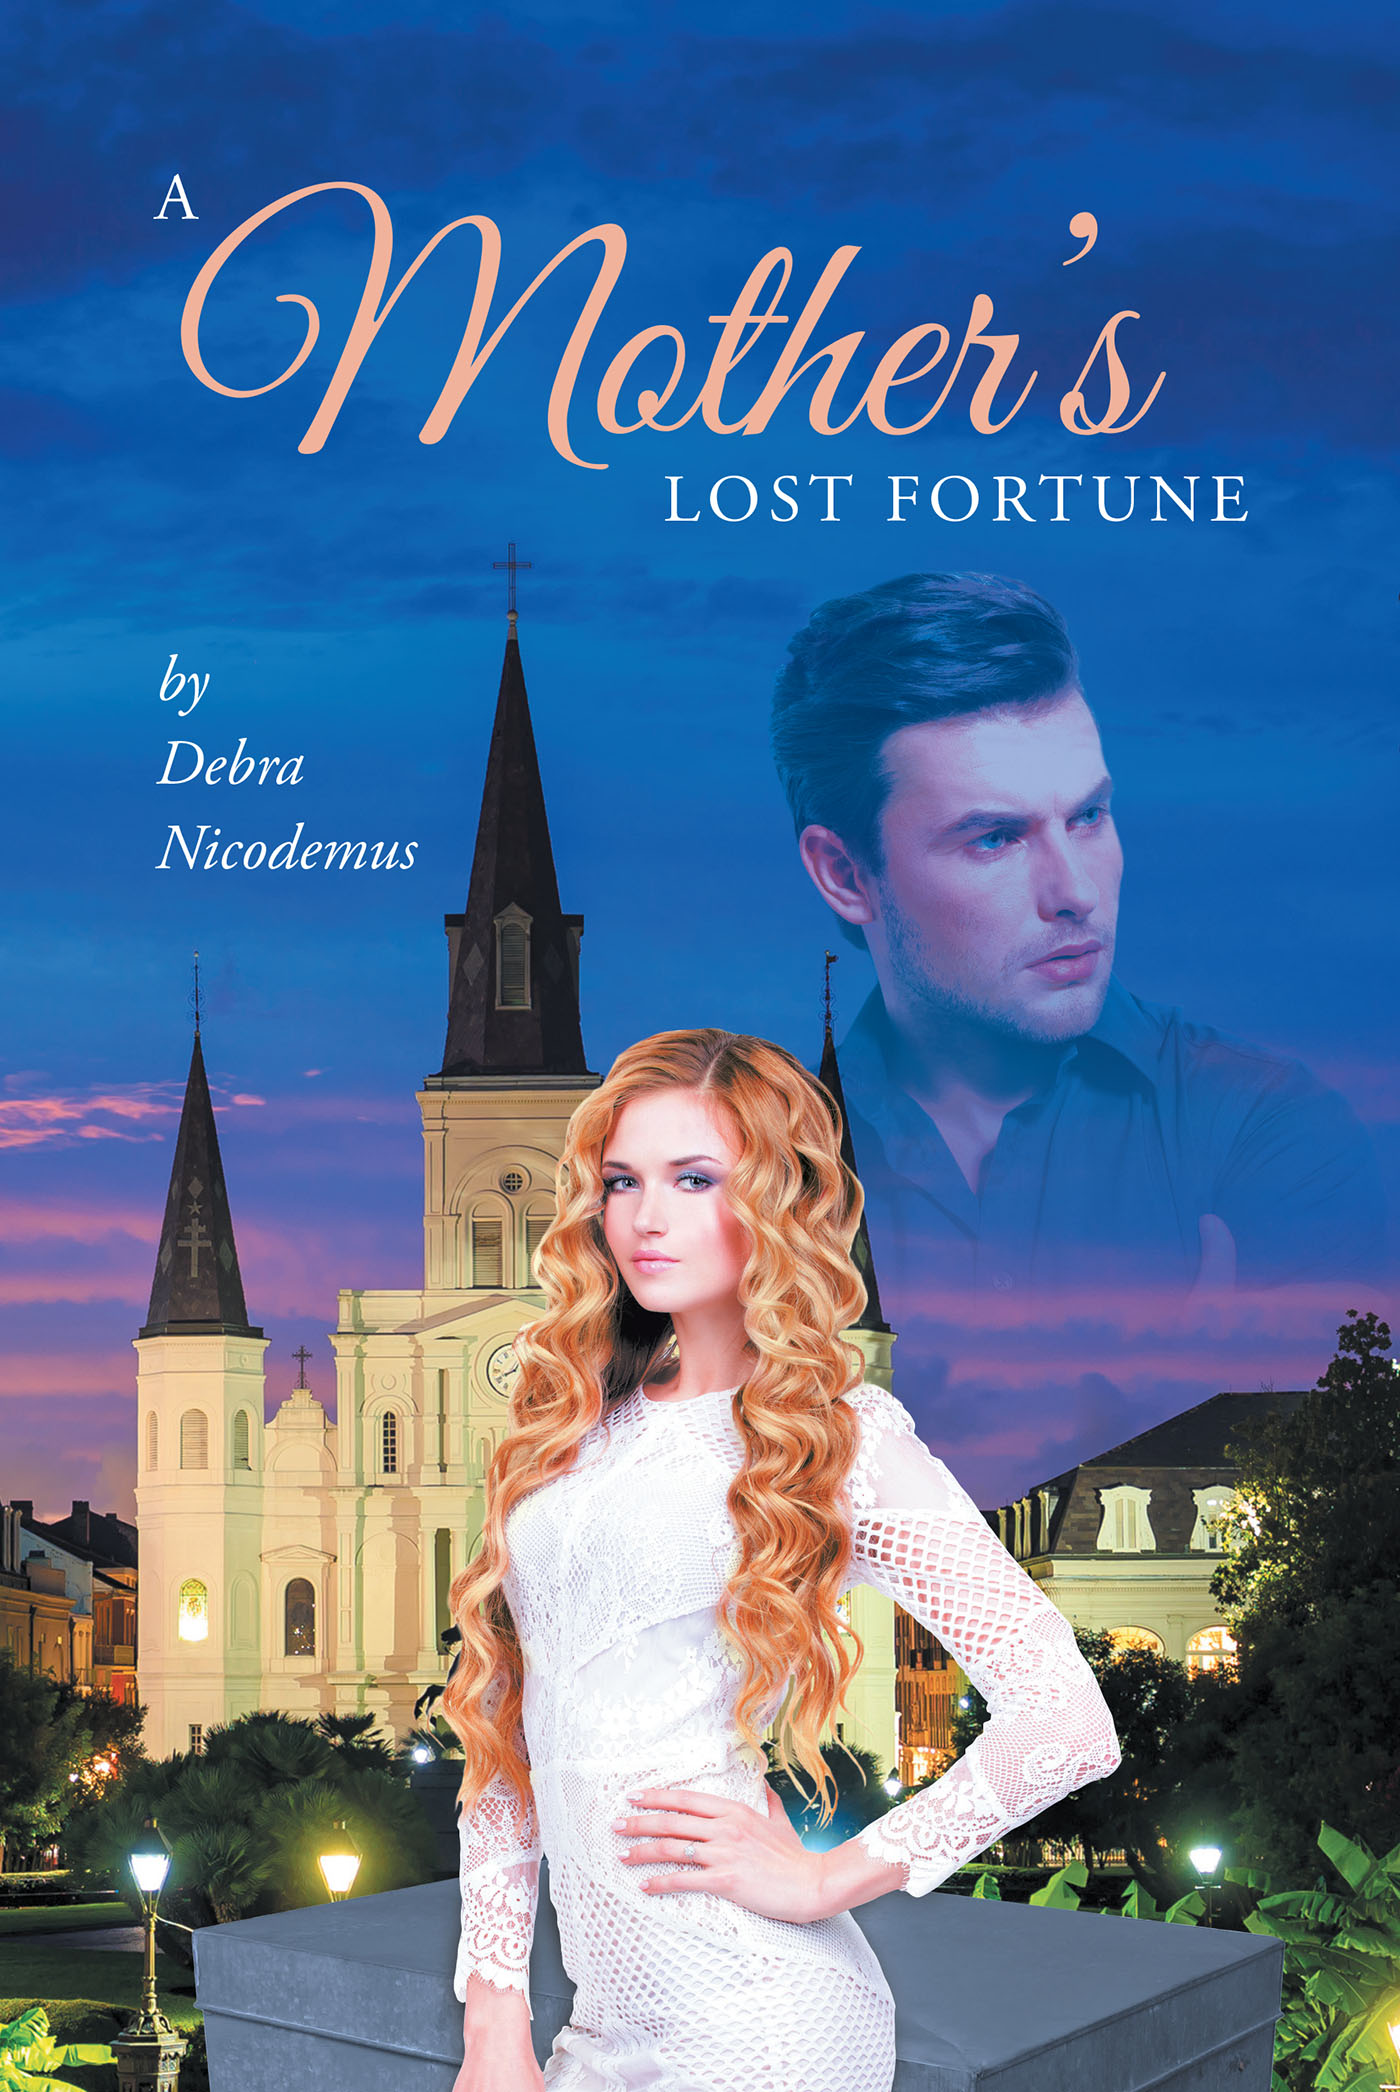 Author Debra Nicodemuss New Book “a Mothers Lost Fortune” Is A Tale